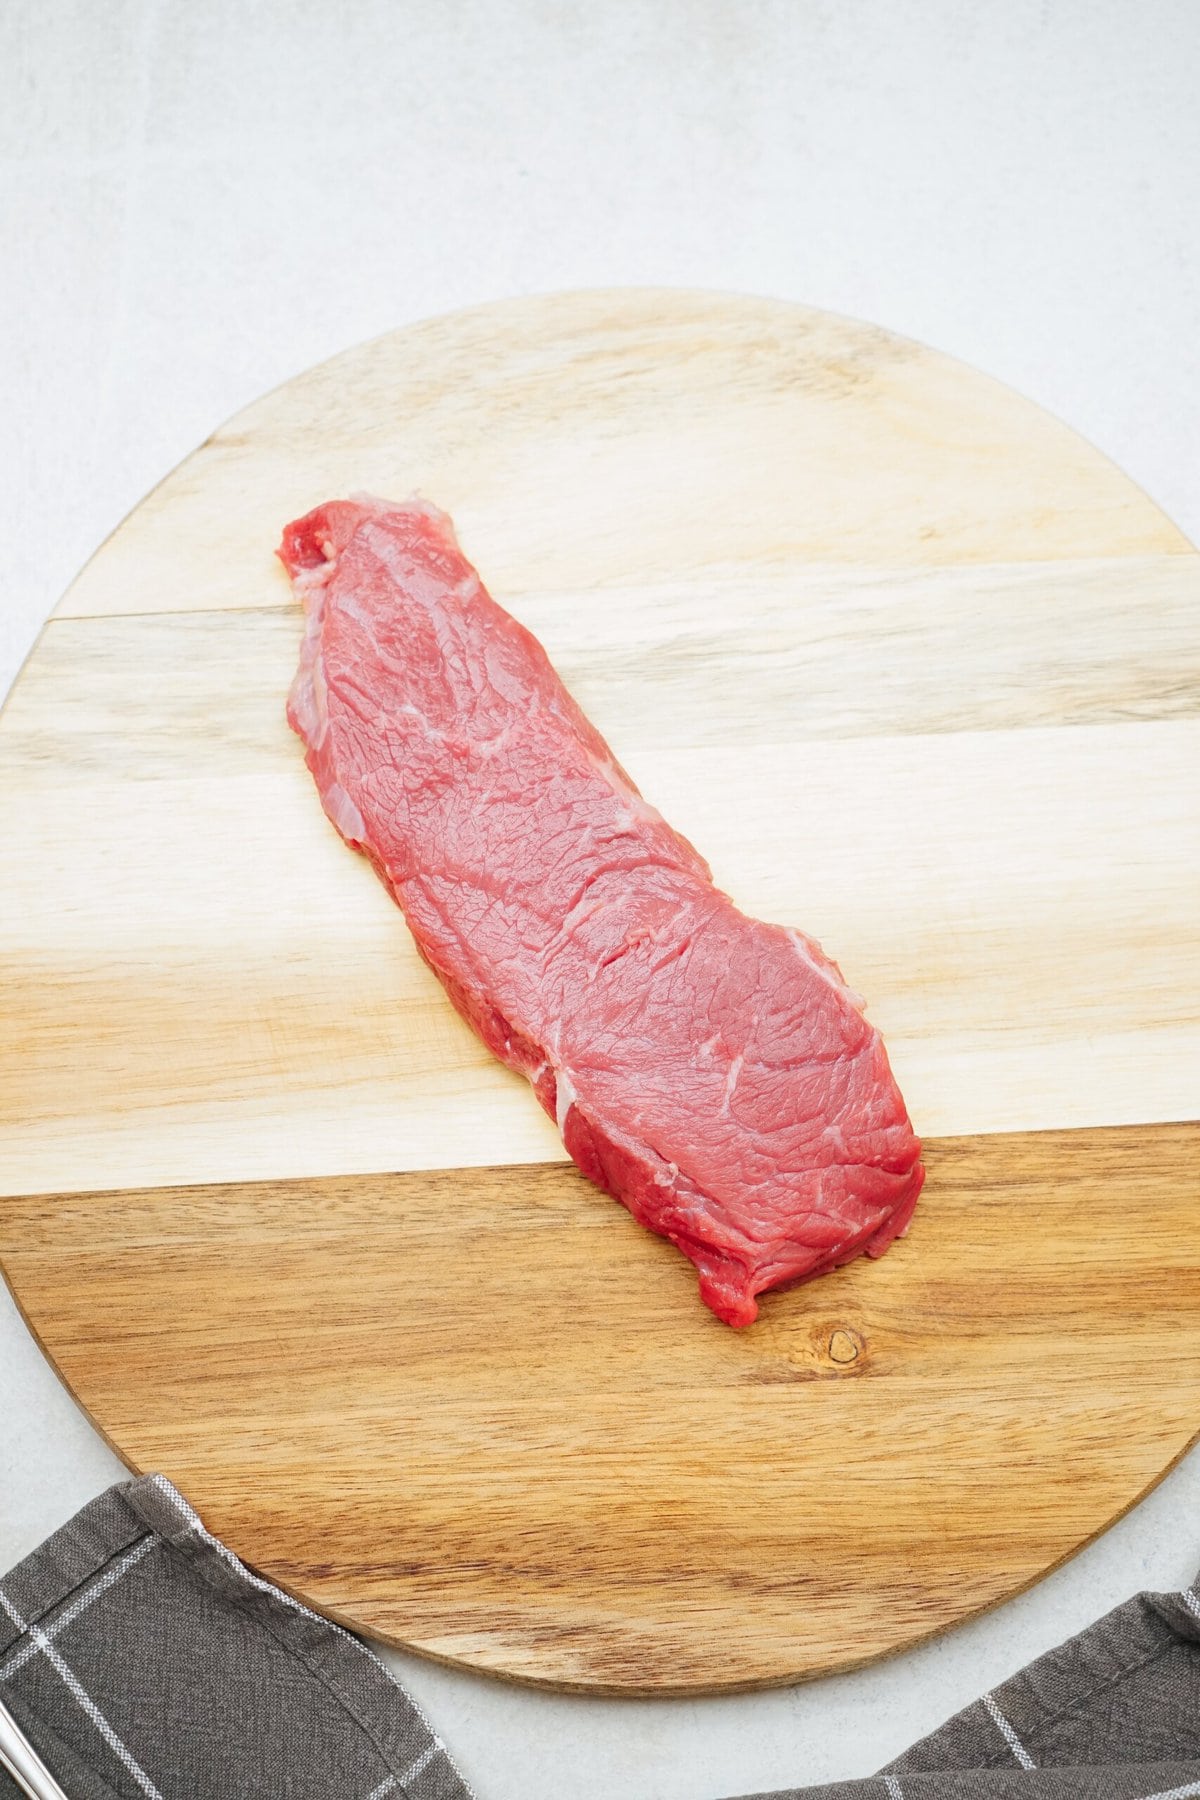 A raw piece of steak on a round wooden cutting board, with a gray and white kitchen towel partially visible at the bottom left.